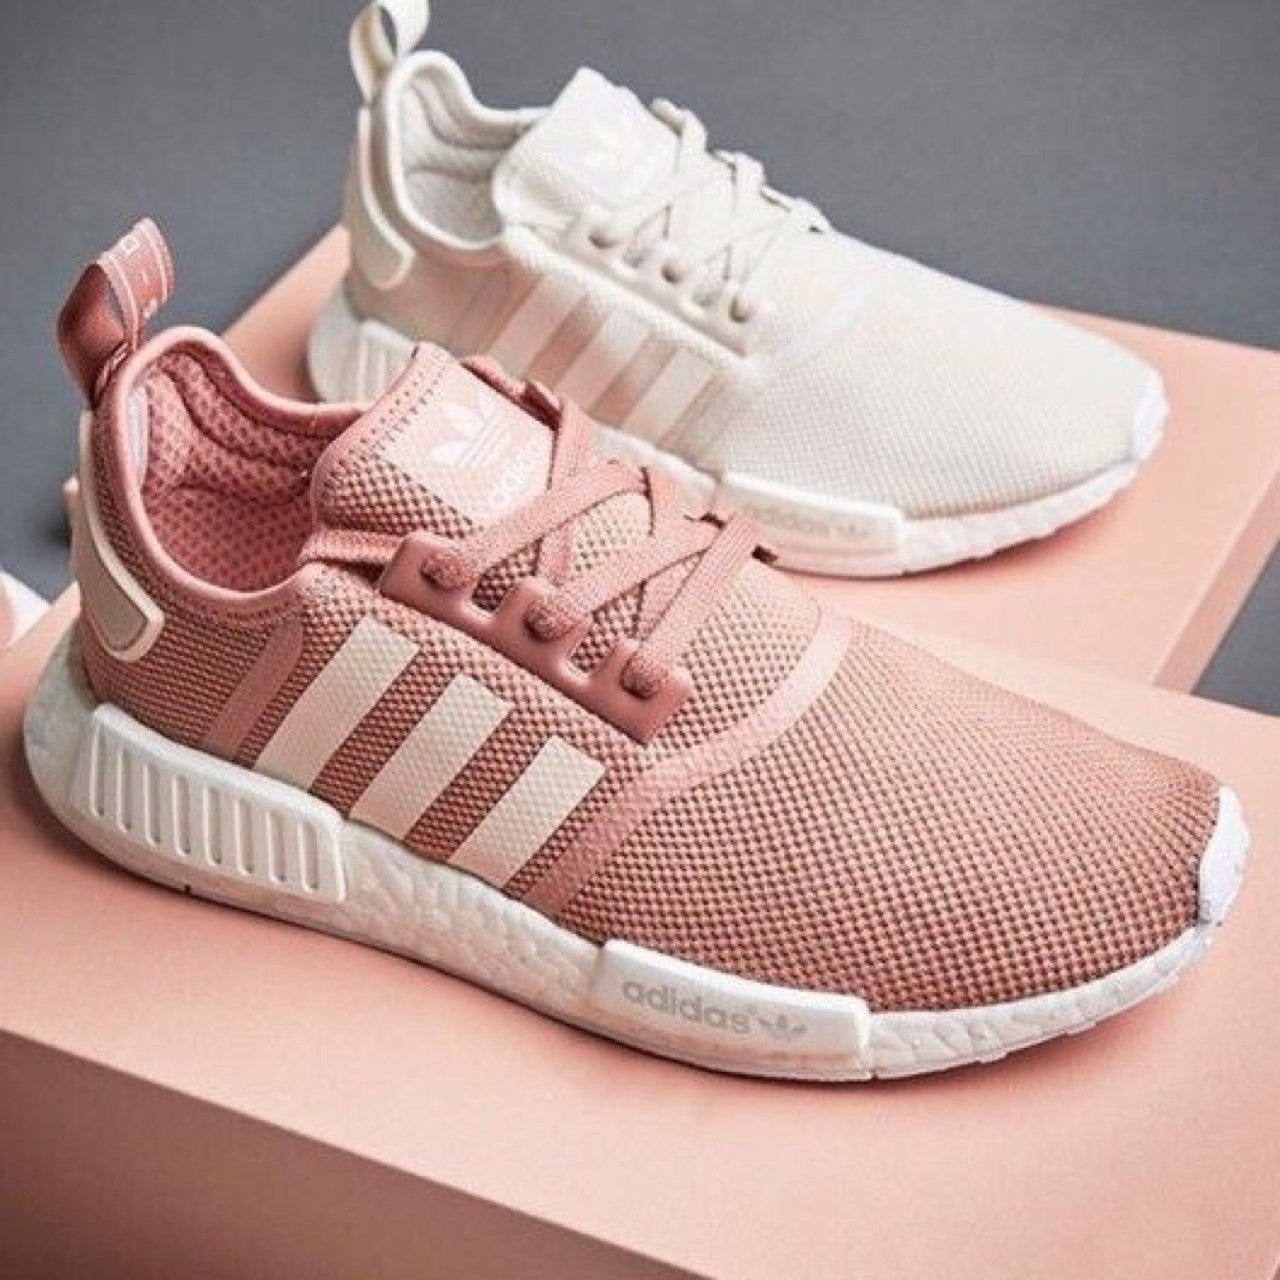 Adidas NMD: the perfect shoe for the 